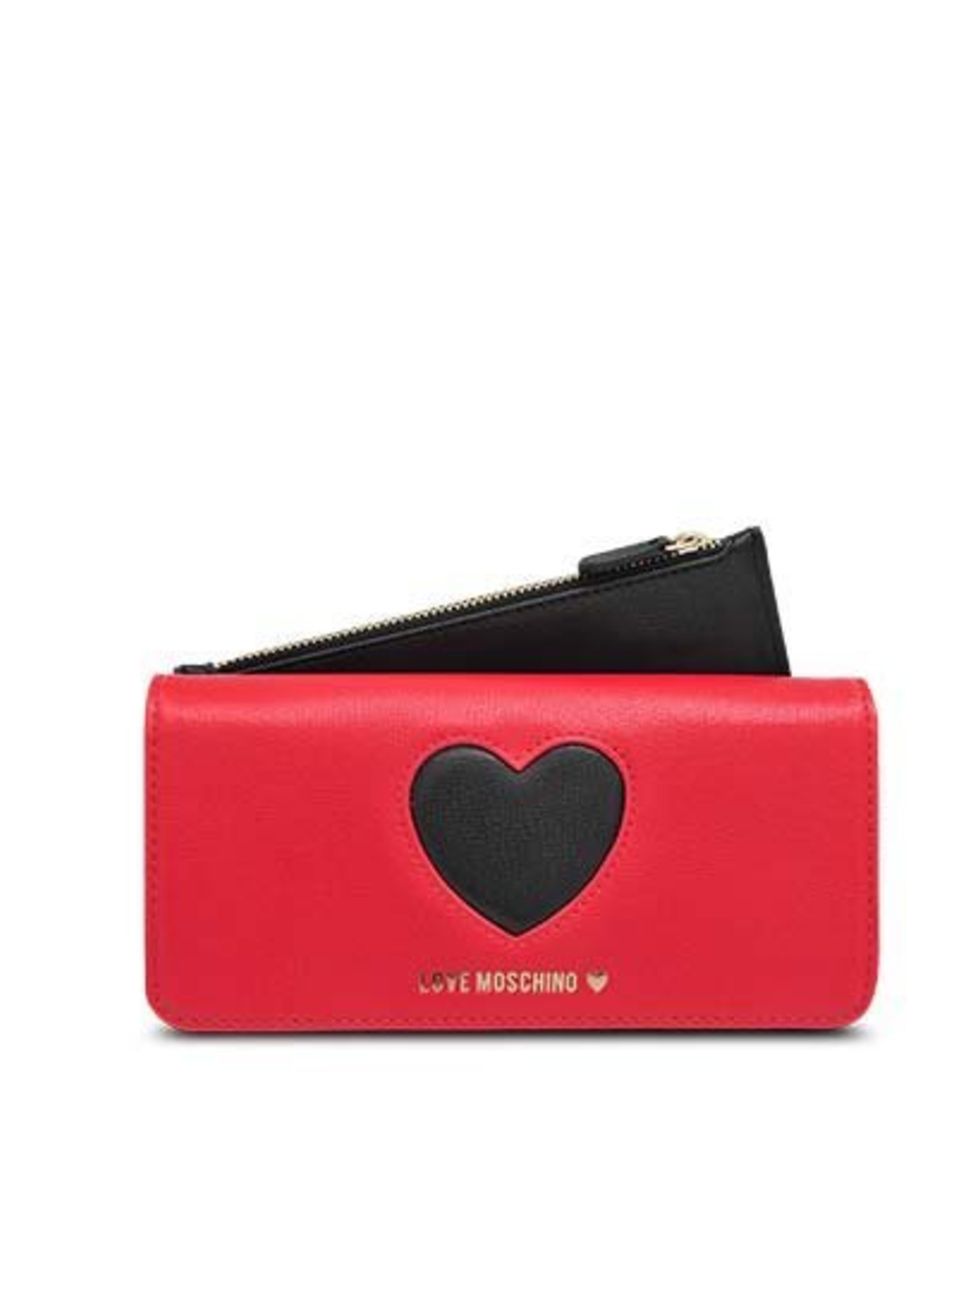 Love Moschino Wallet, £100 at Monnier Frères.